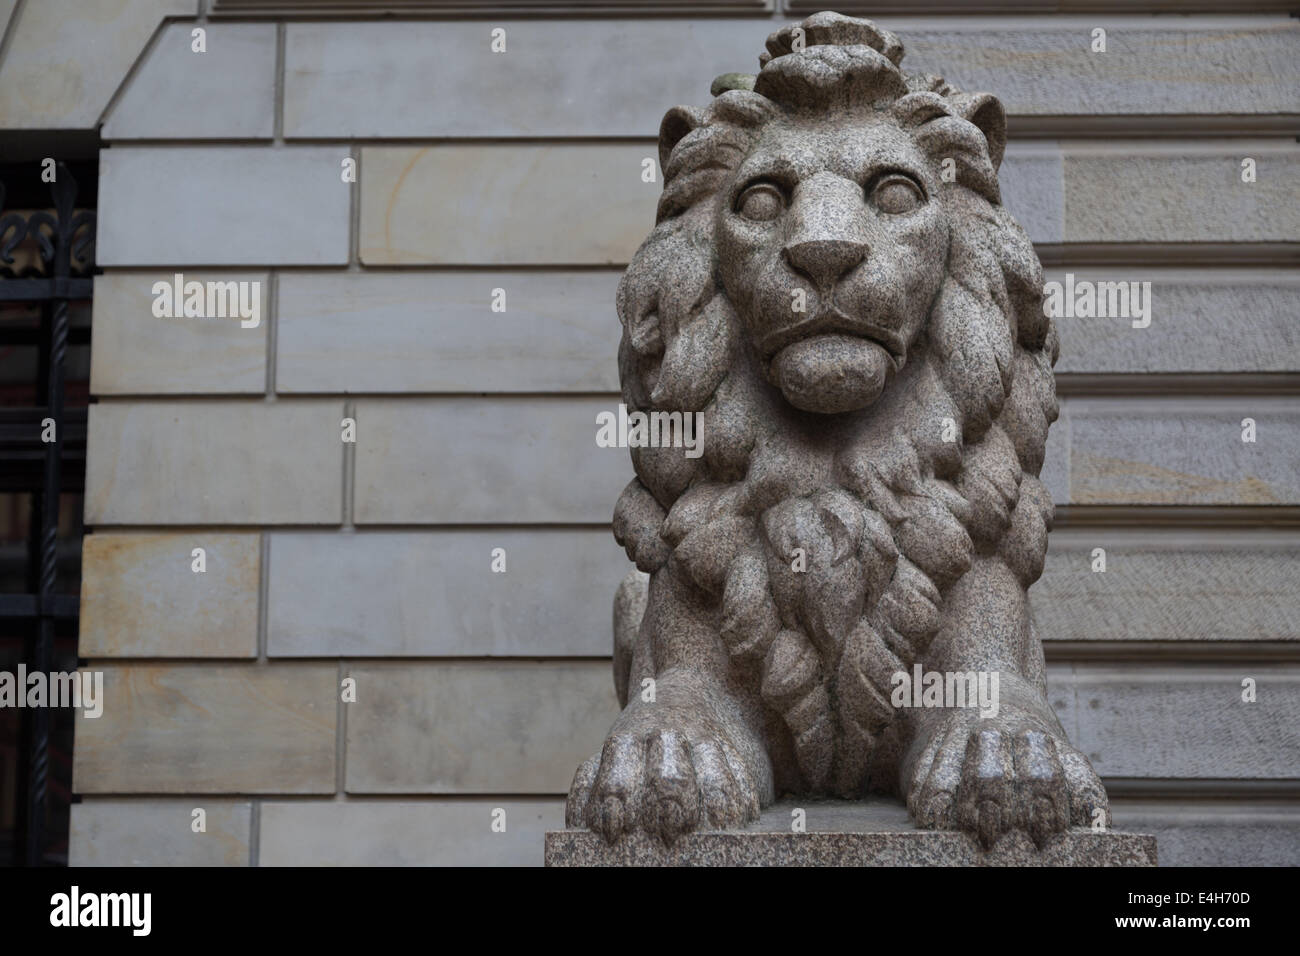 A close up photograph of a lion outside the Town Hall (Rathaus) in Hamburg. Stock Photo